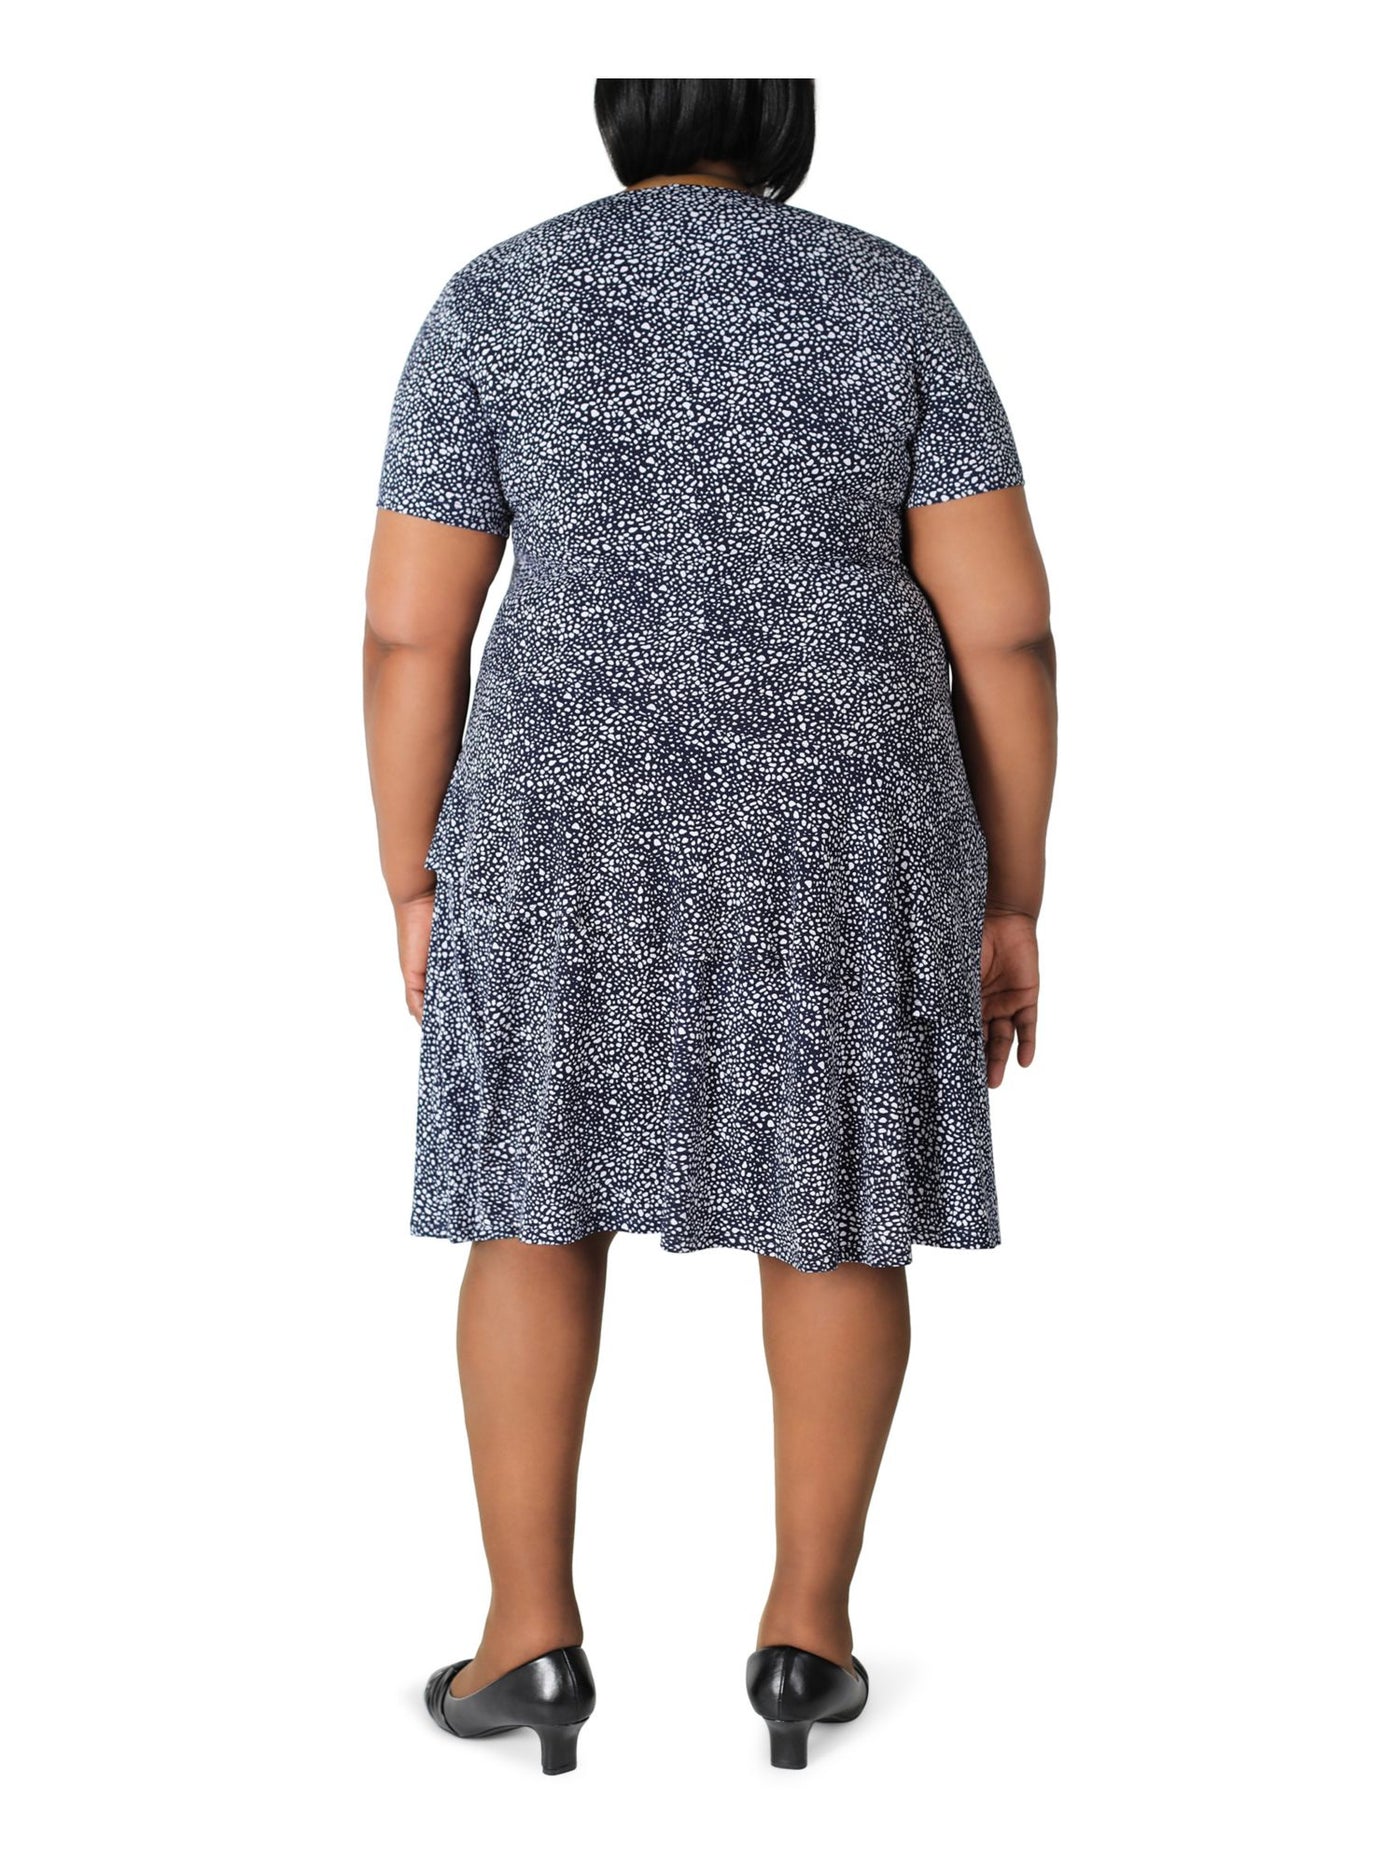 SIGNATURE BY ROBBIE BEE Womens Navy Stretch Ruffled Printed Surplice Neckline Midi Party Fit + Flare Dress Plus 3X